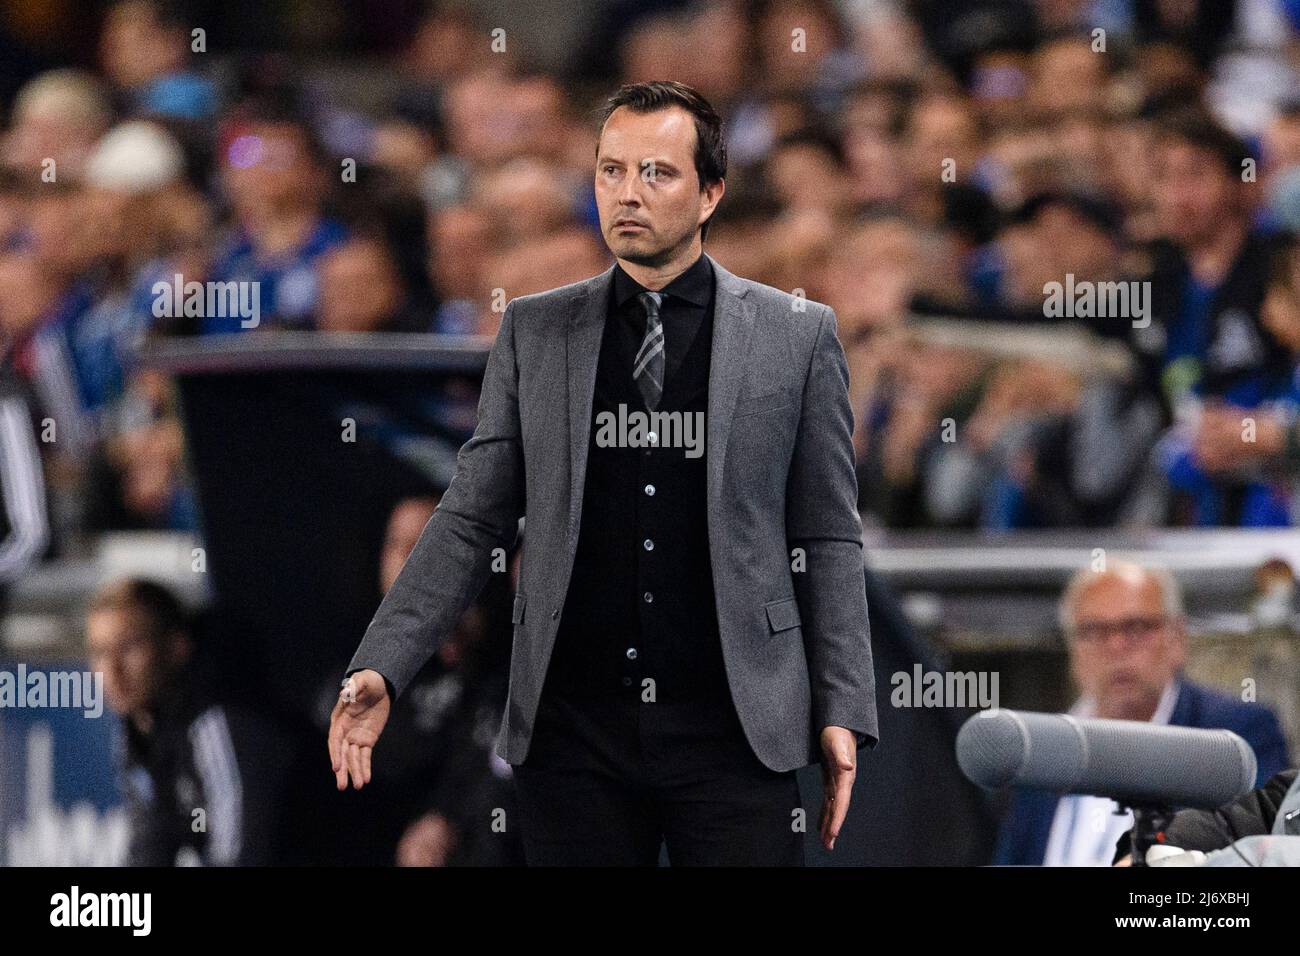 Stephan Unveiled As New Strasbourg Coach